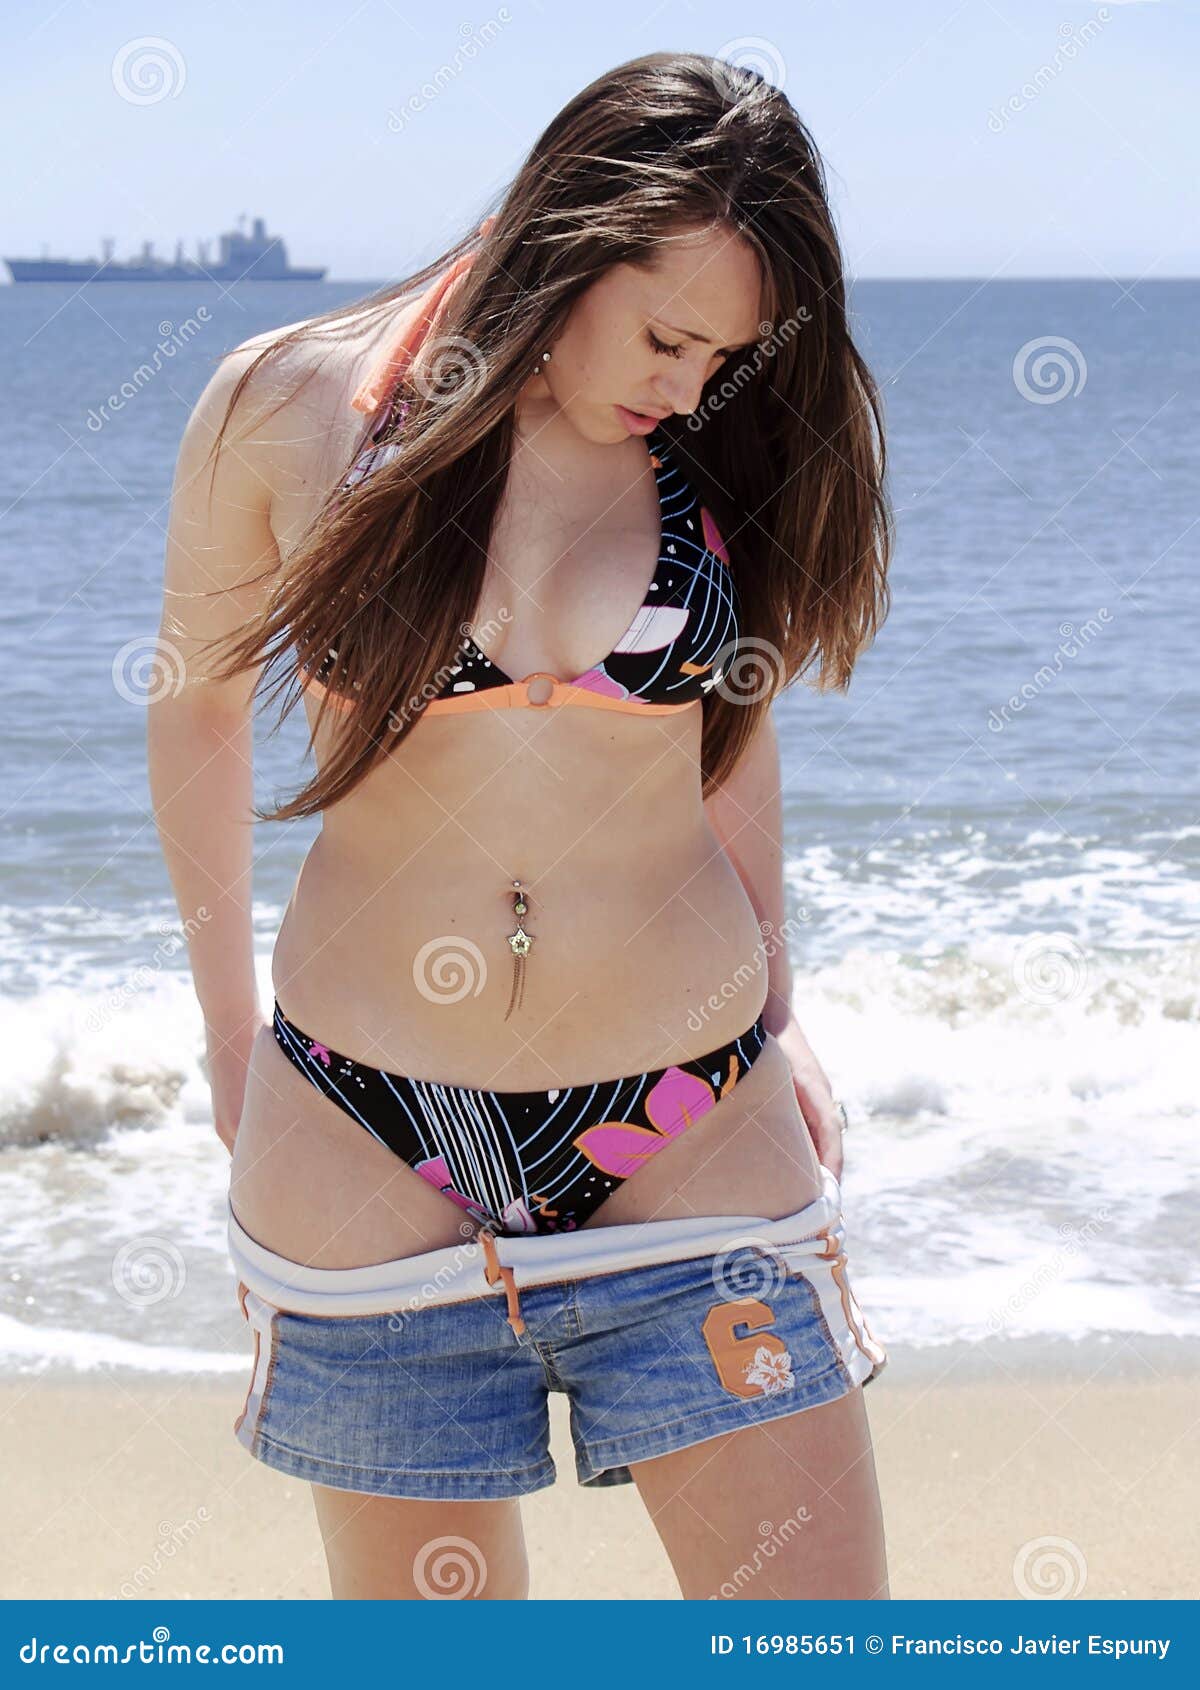 Undressing the Skirt at the Beach Stock Image